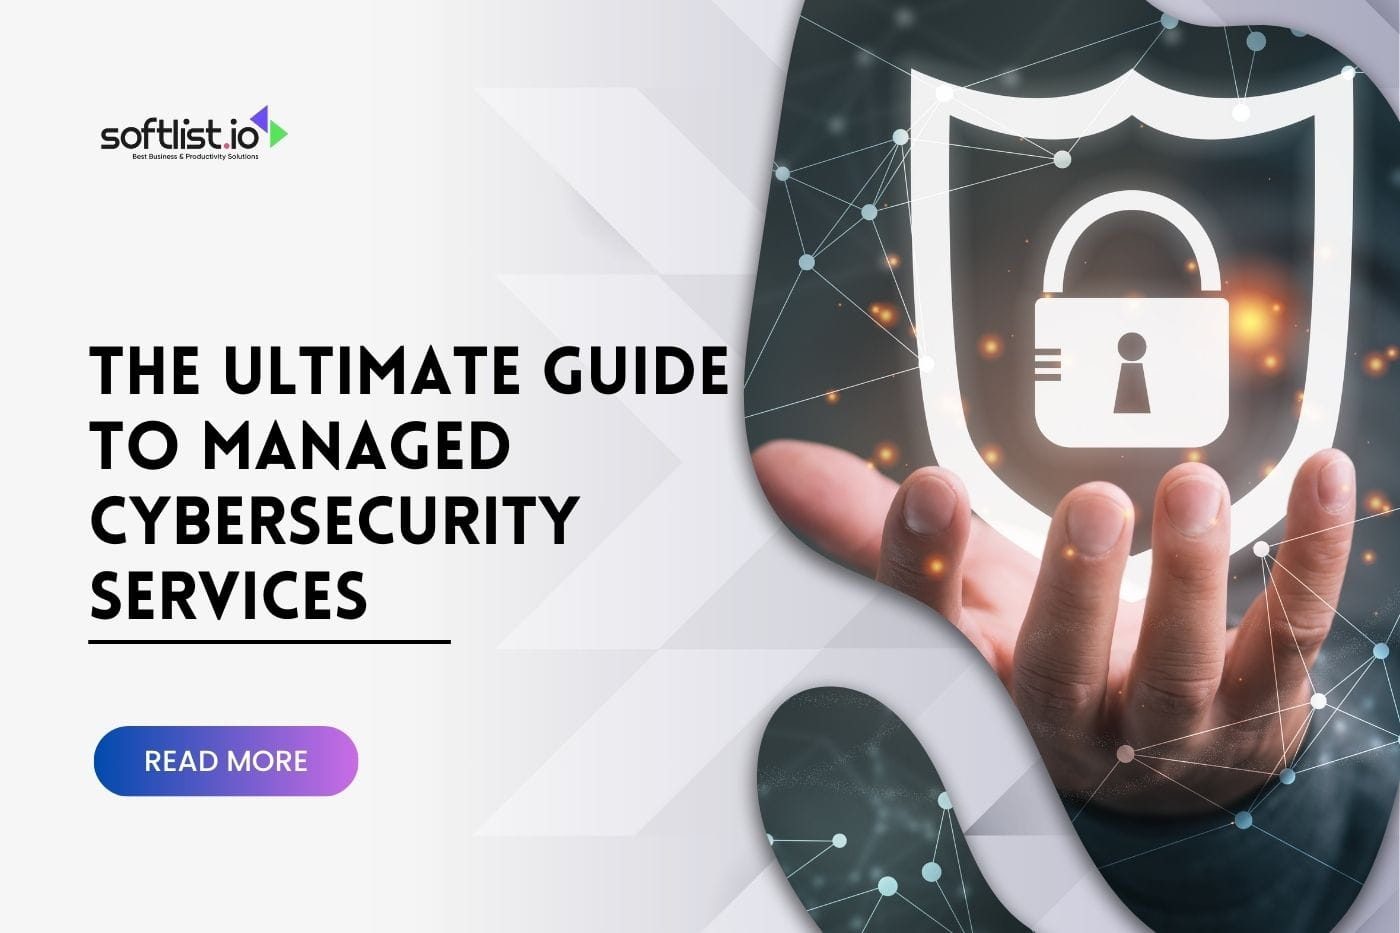 The Ultimate Guide to Managed Cybersecurity Services